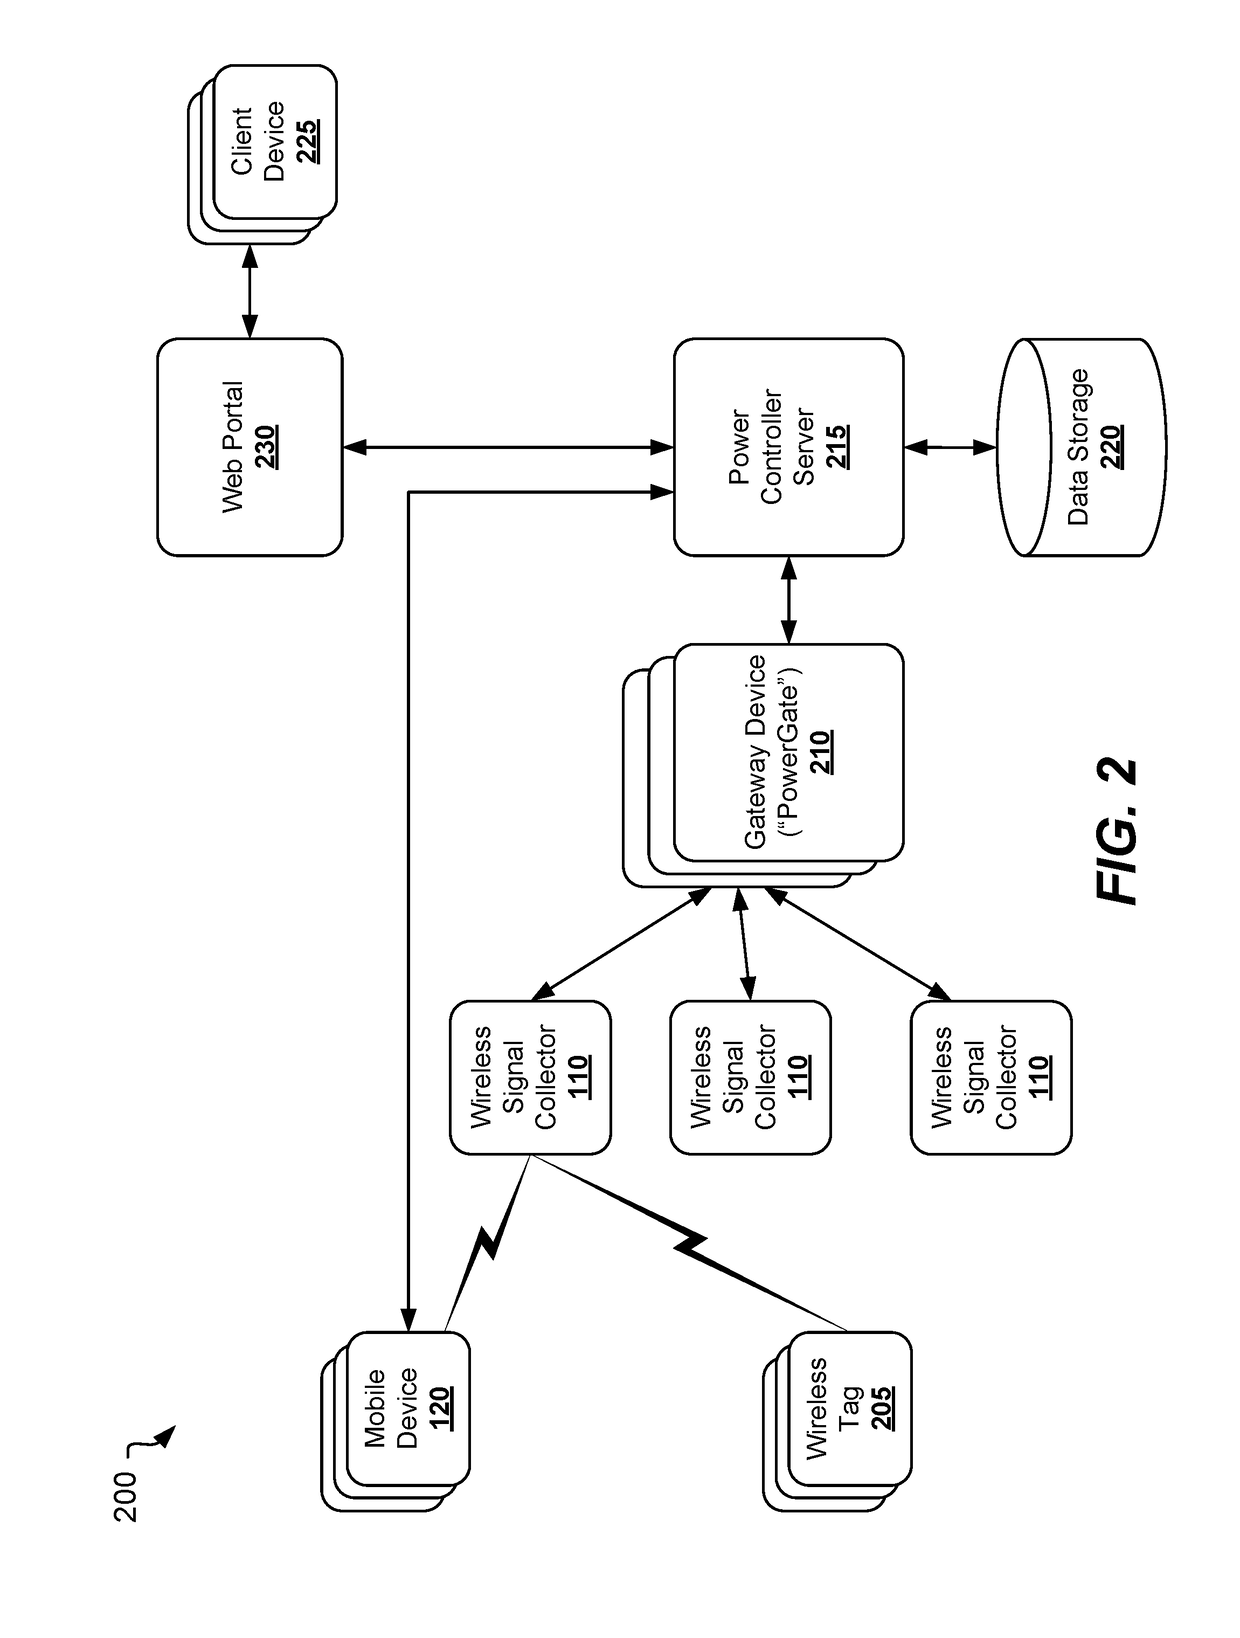 System and method for discovery and collection of real-time location data